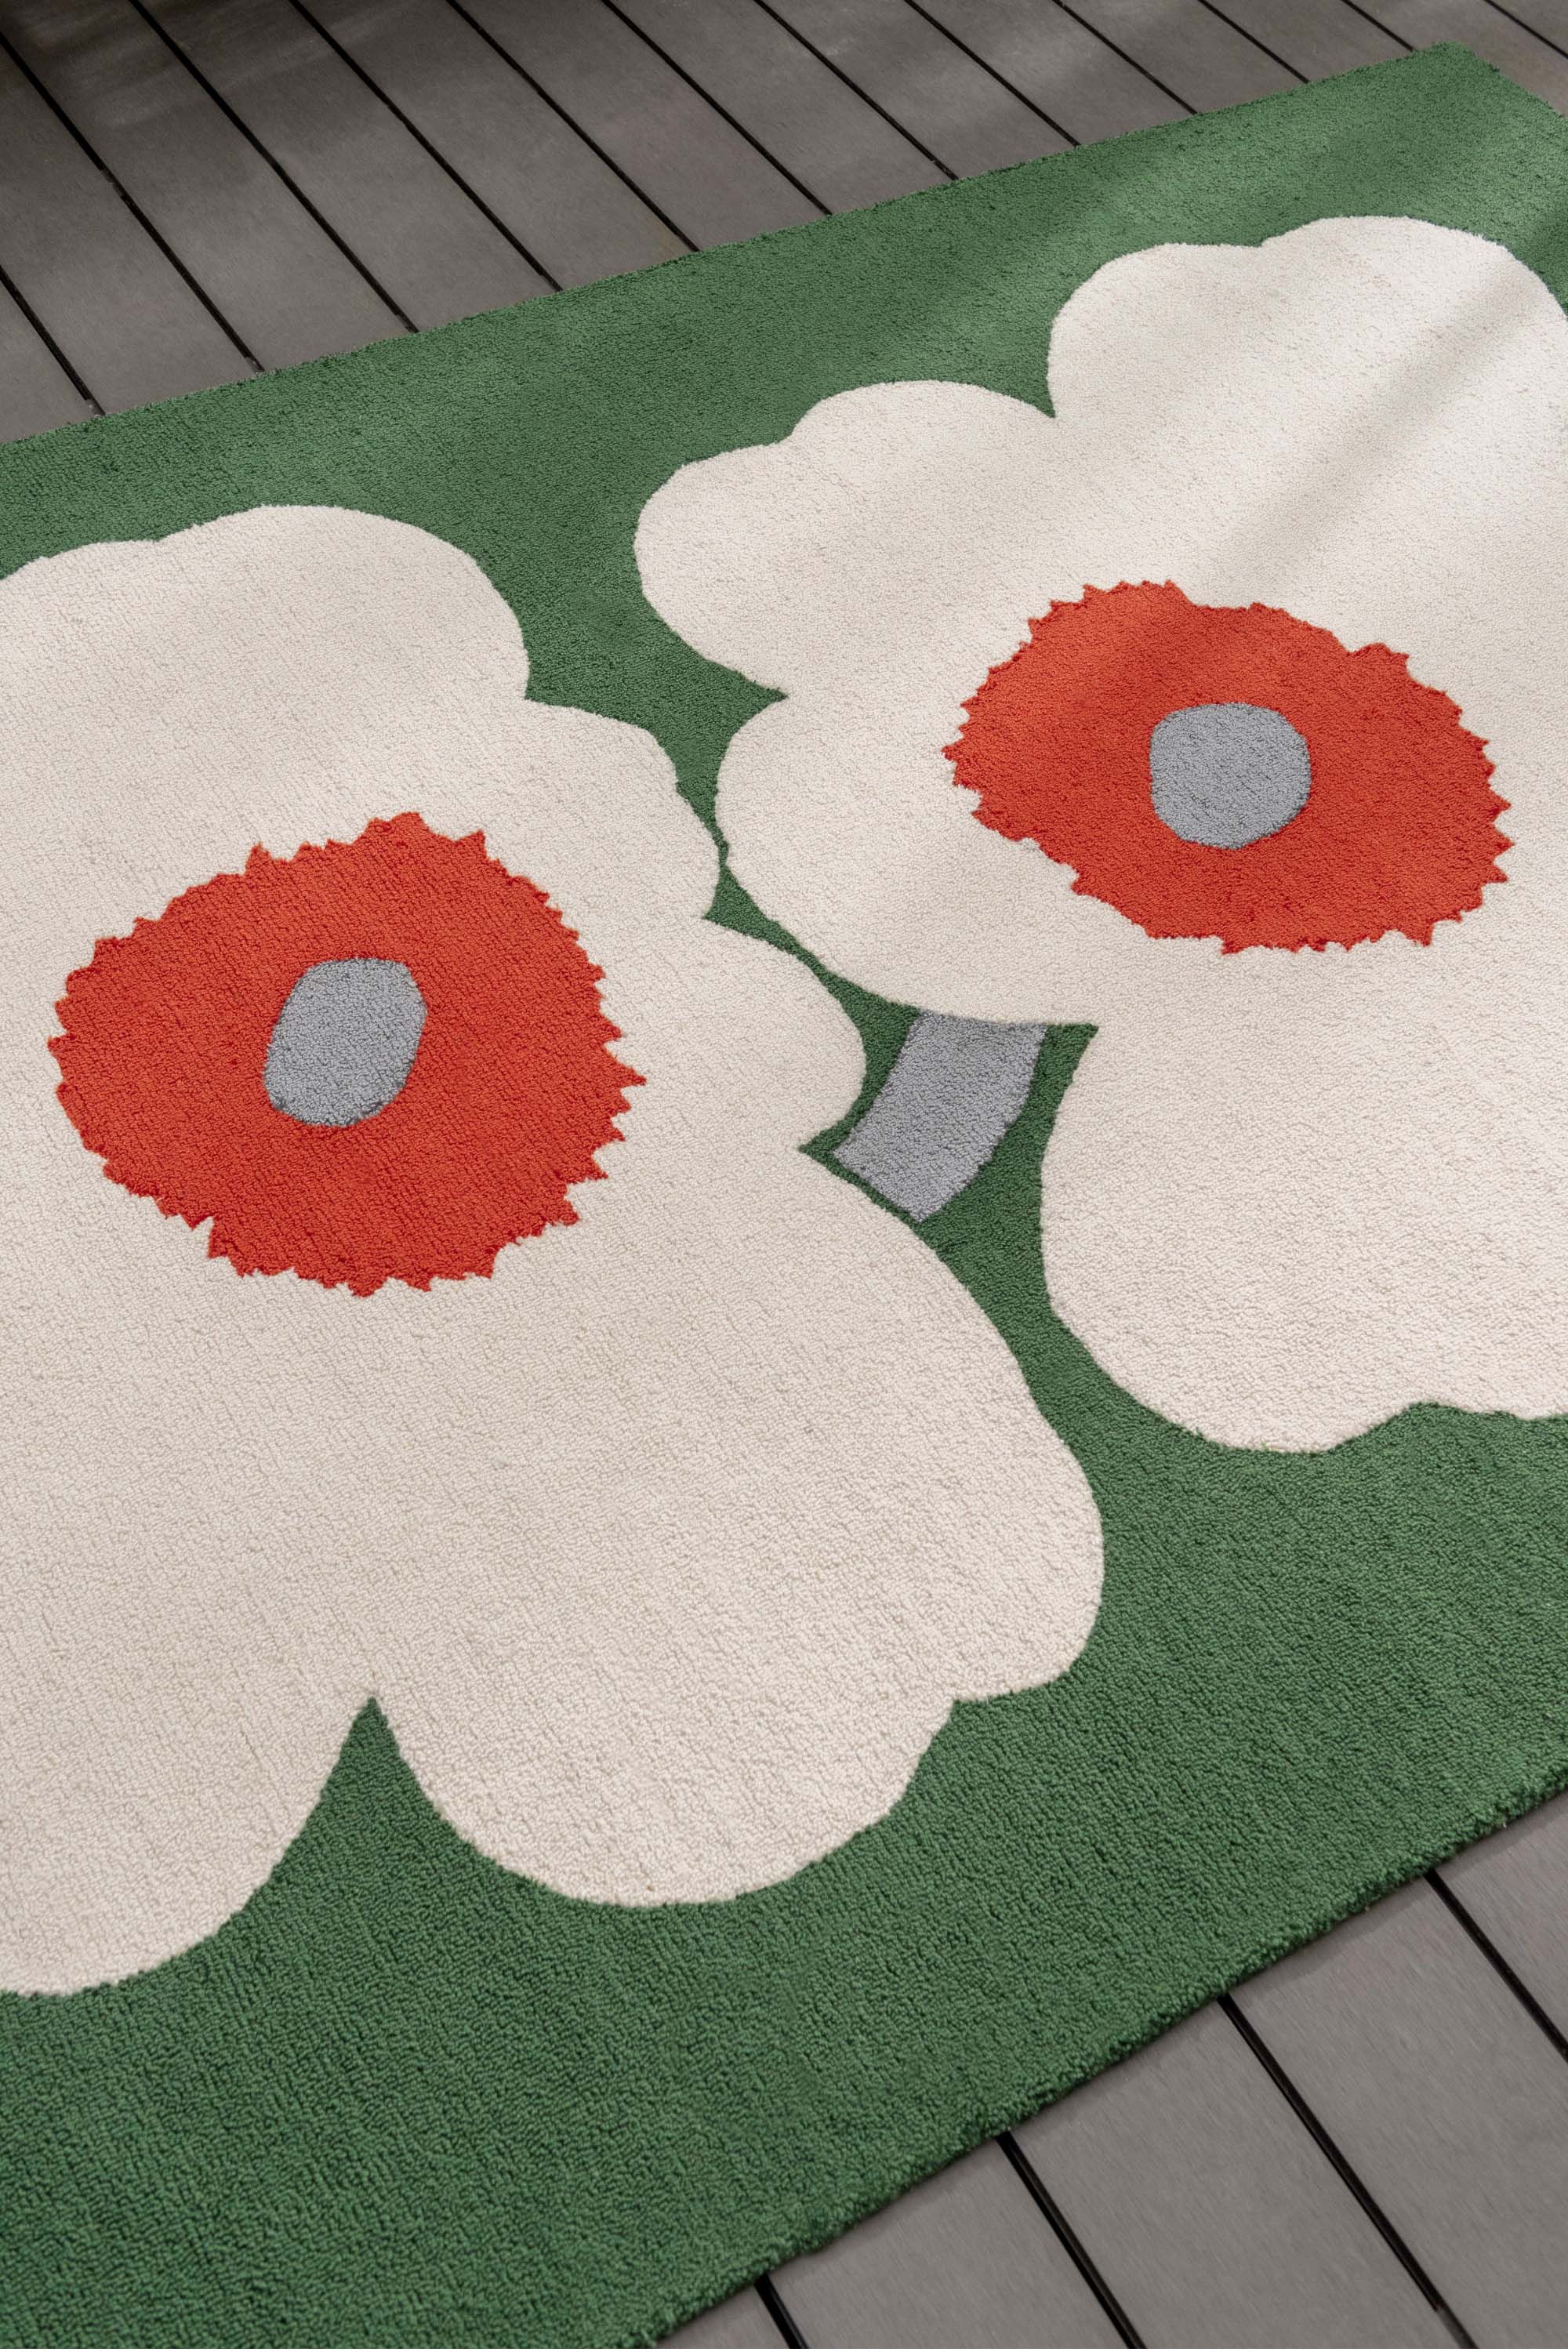 Green rug with white and orange floral motif